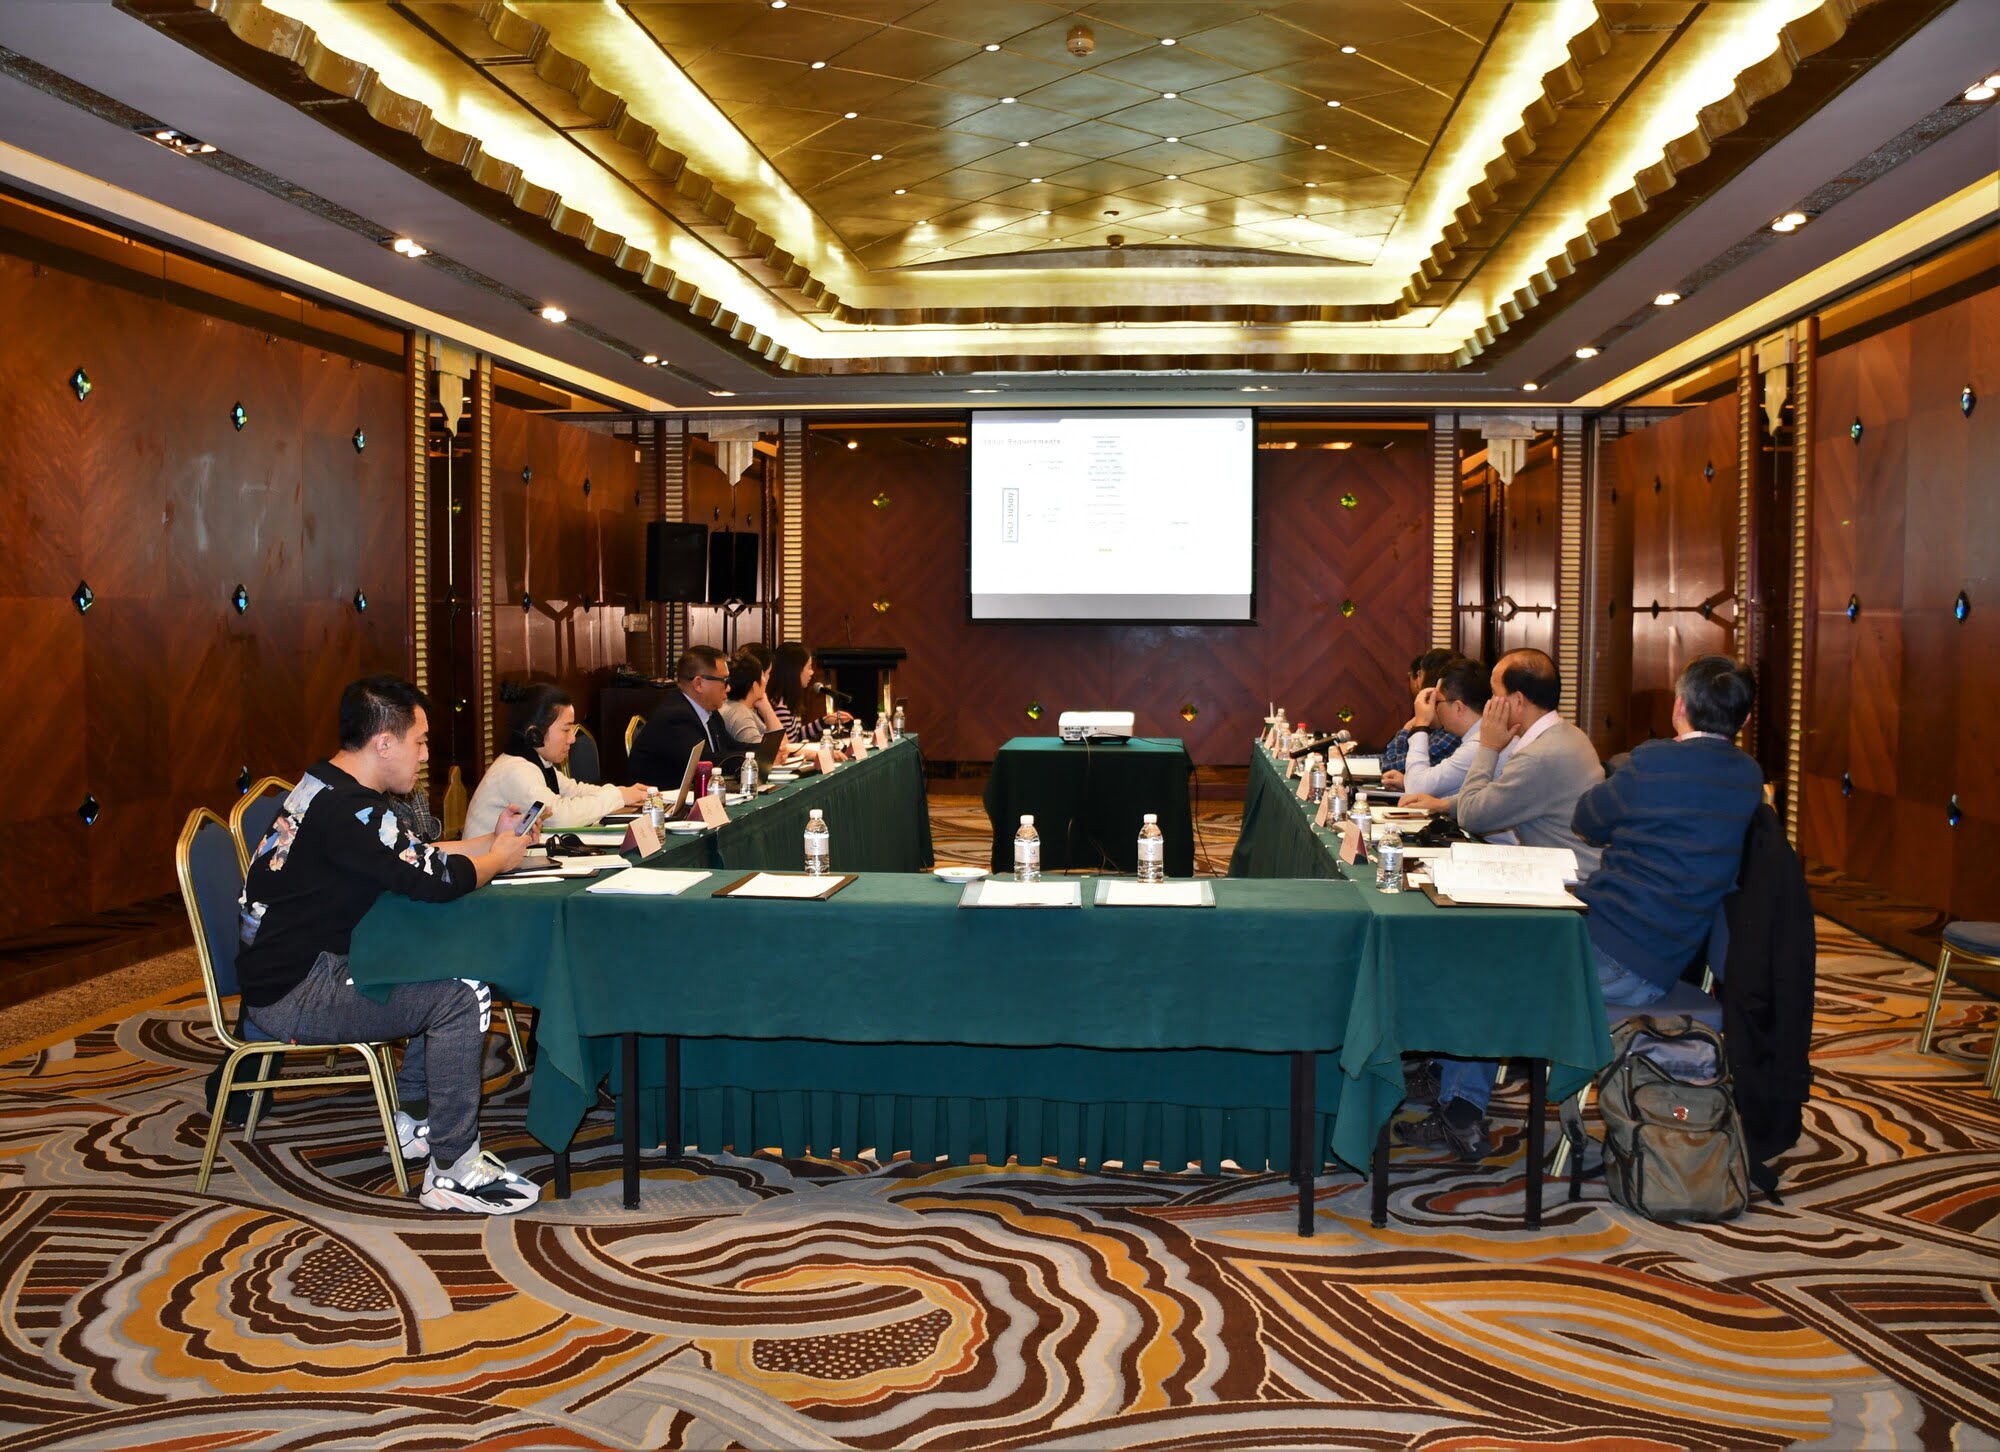 China, December 2019 National Technical Committee 451 Meeting